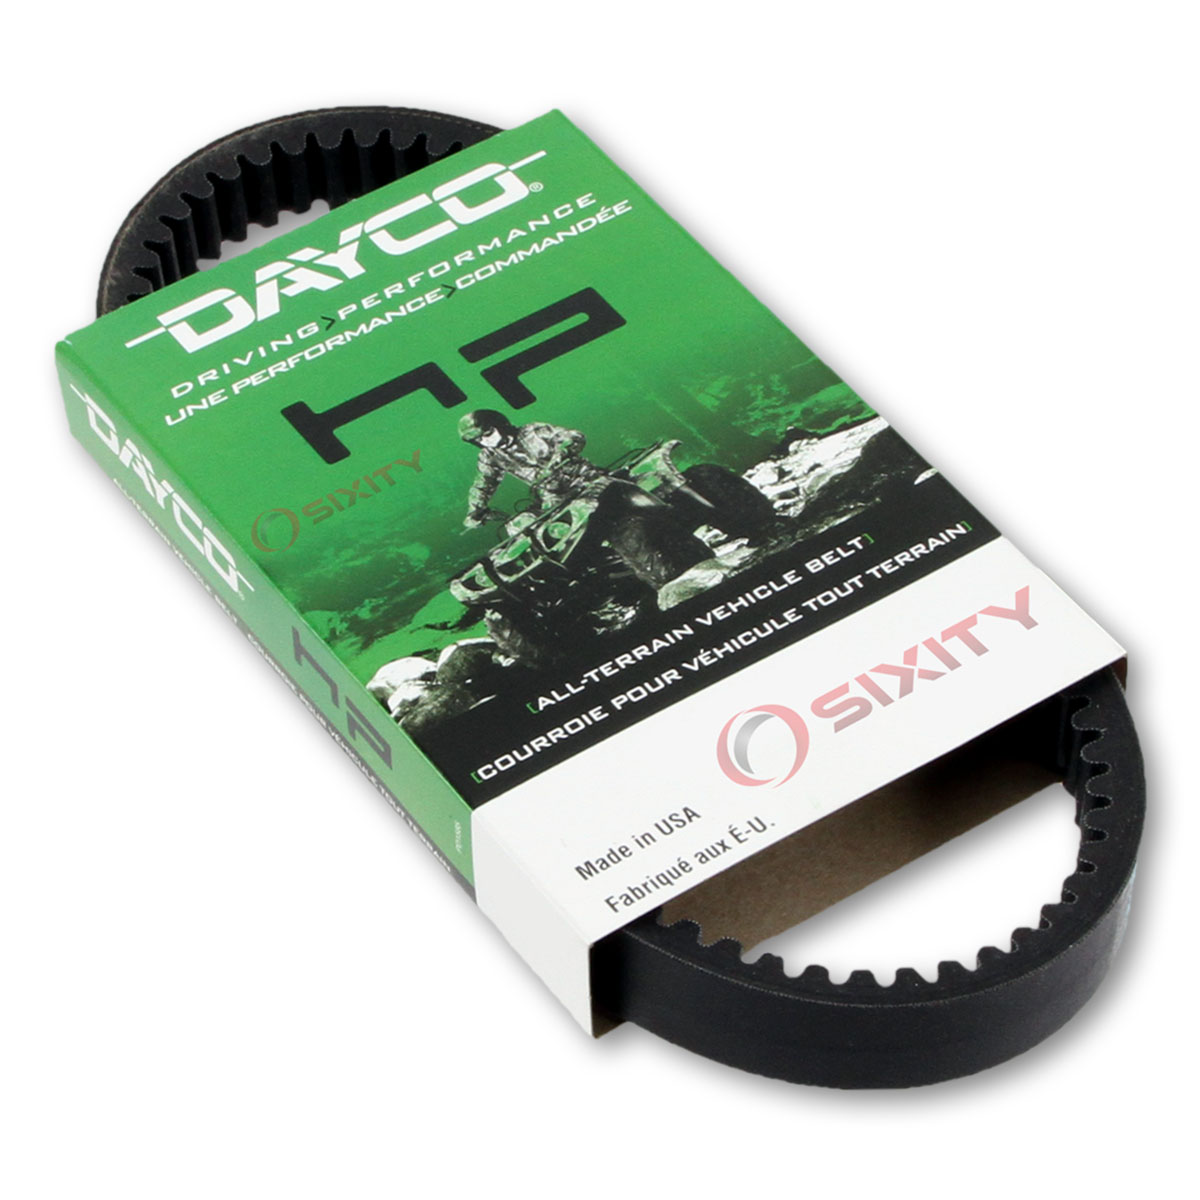 Dayco HP Drive Belt for 2003-2004 Arctic Cat 400 4x4 ACT - High Performance